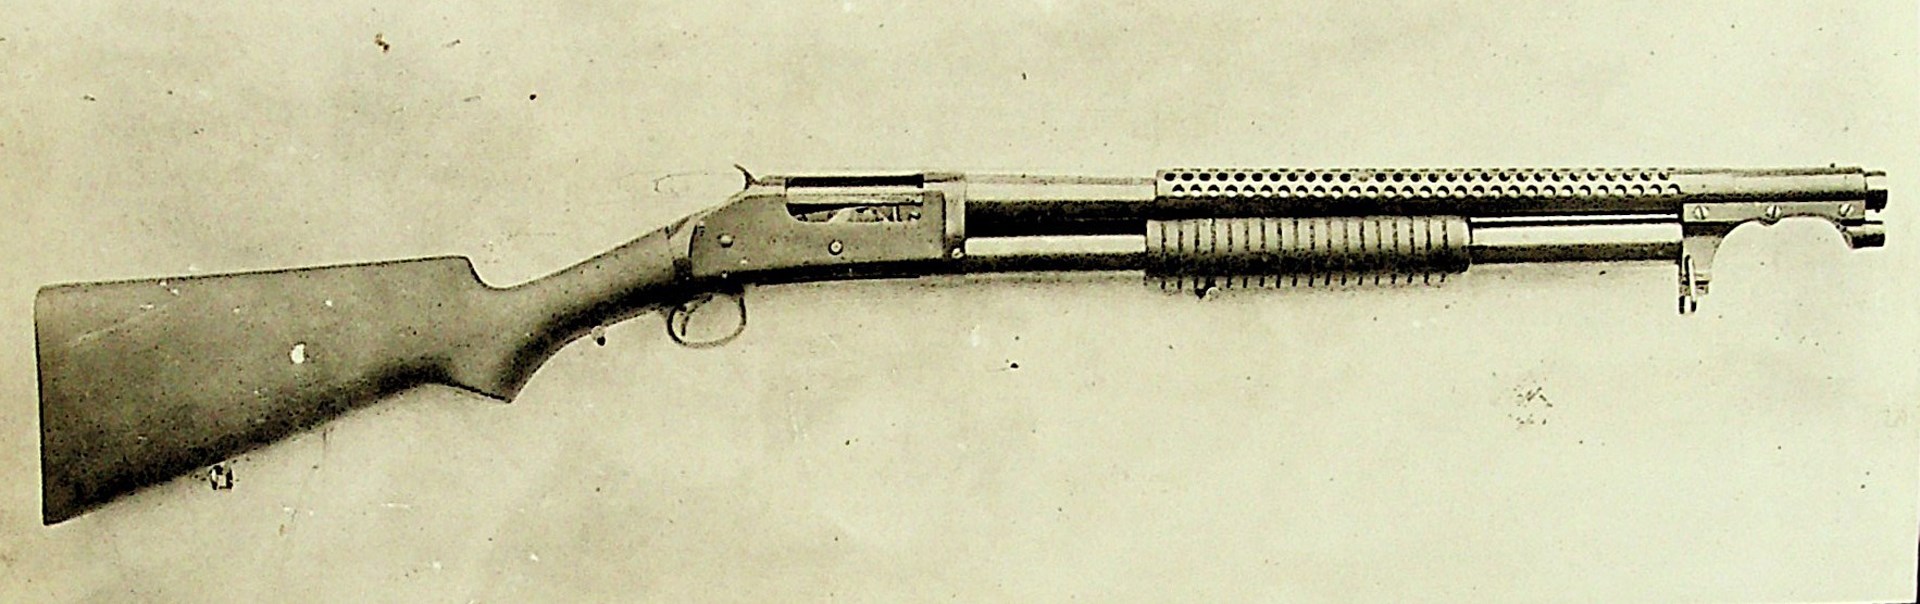 This side profile of a M1897 Winchester riot gun with bayonet adapter shows the typical WWI features: High comb stock, 29 hole-per-row heat shield, and clamp-on bayonet adapter. Document courtesy of Archival Research Group.